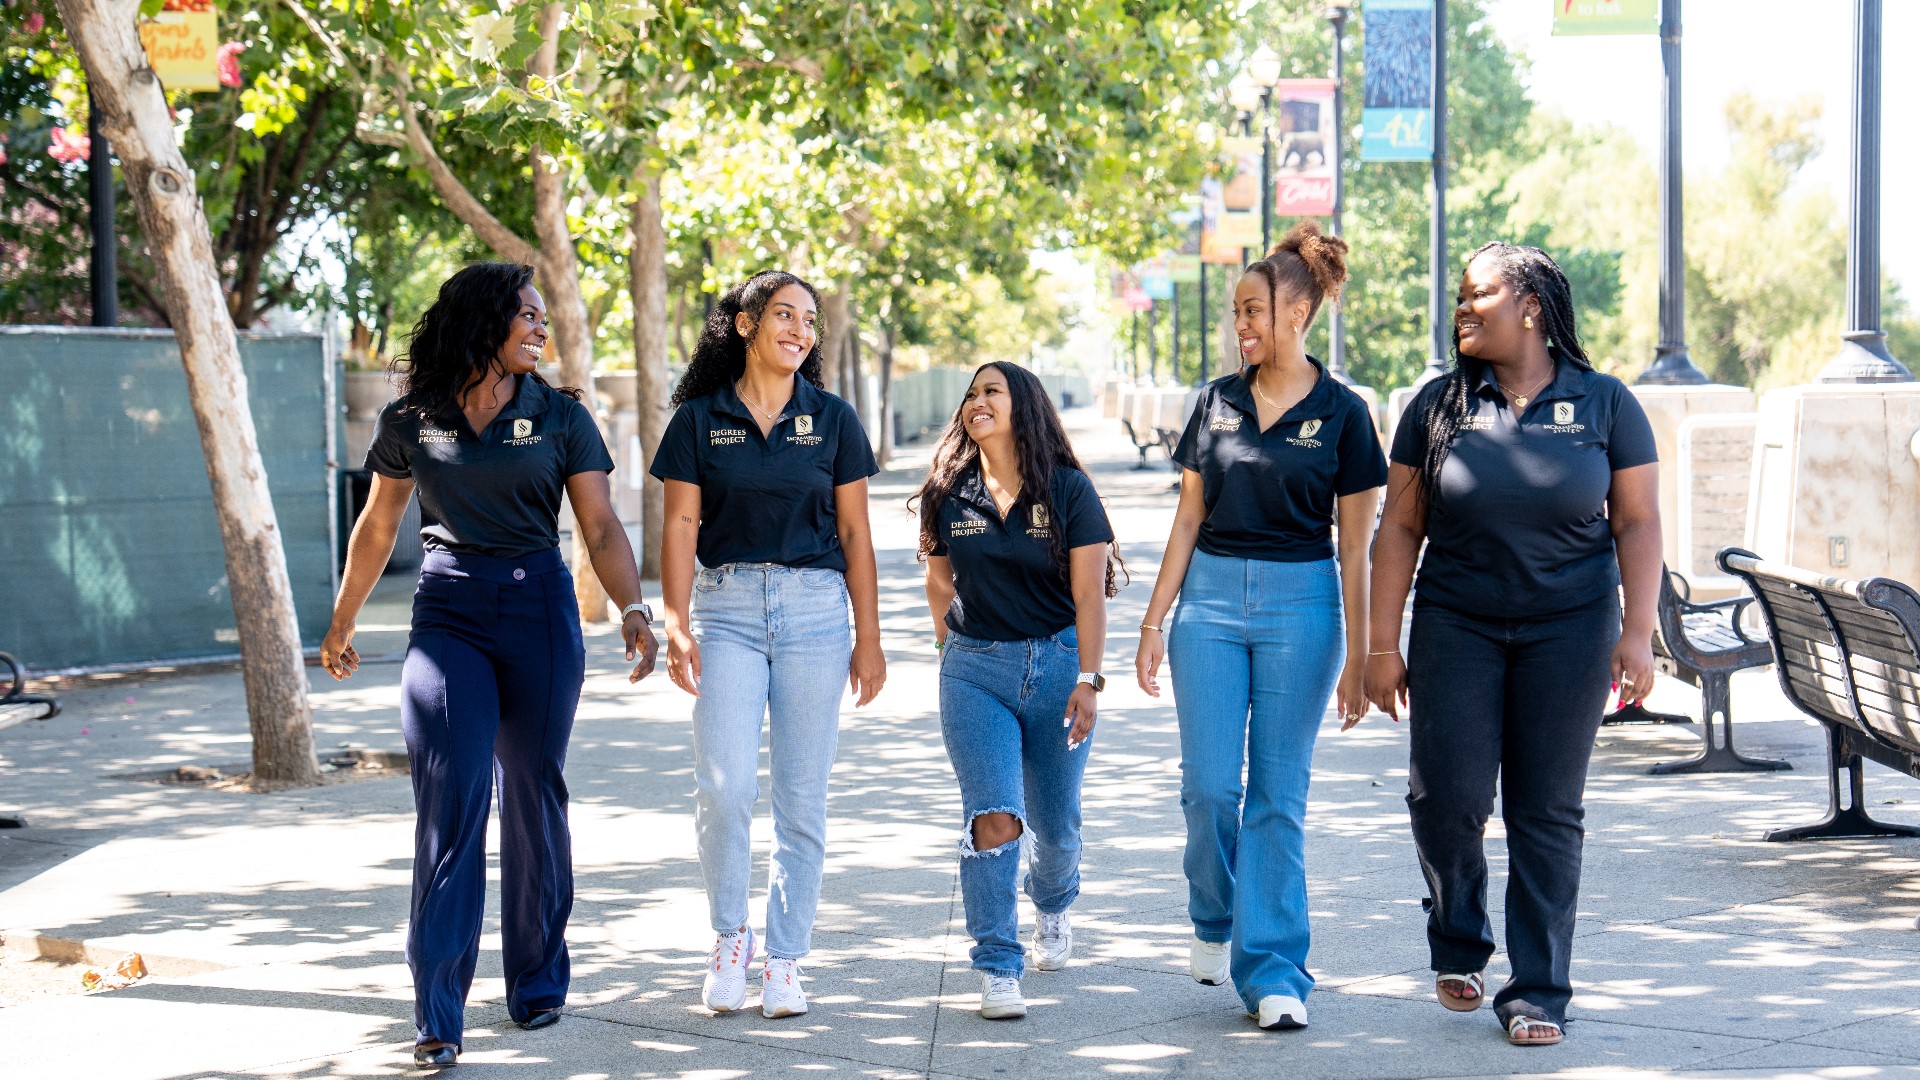 The California State University system is seeing a decline in Black student enrollment and retention.